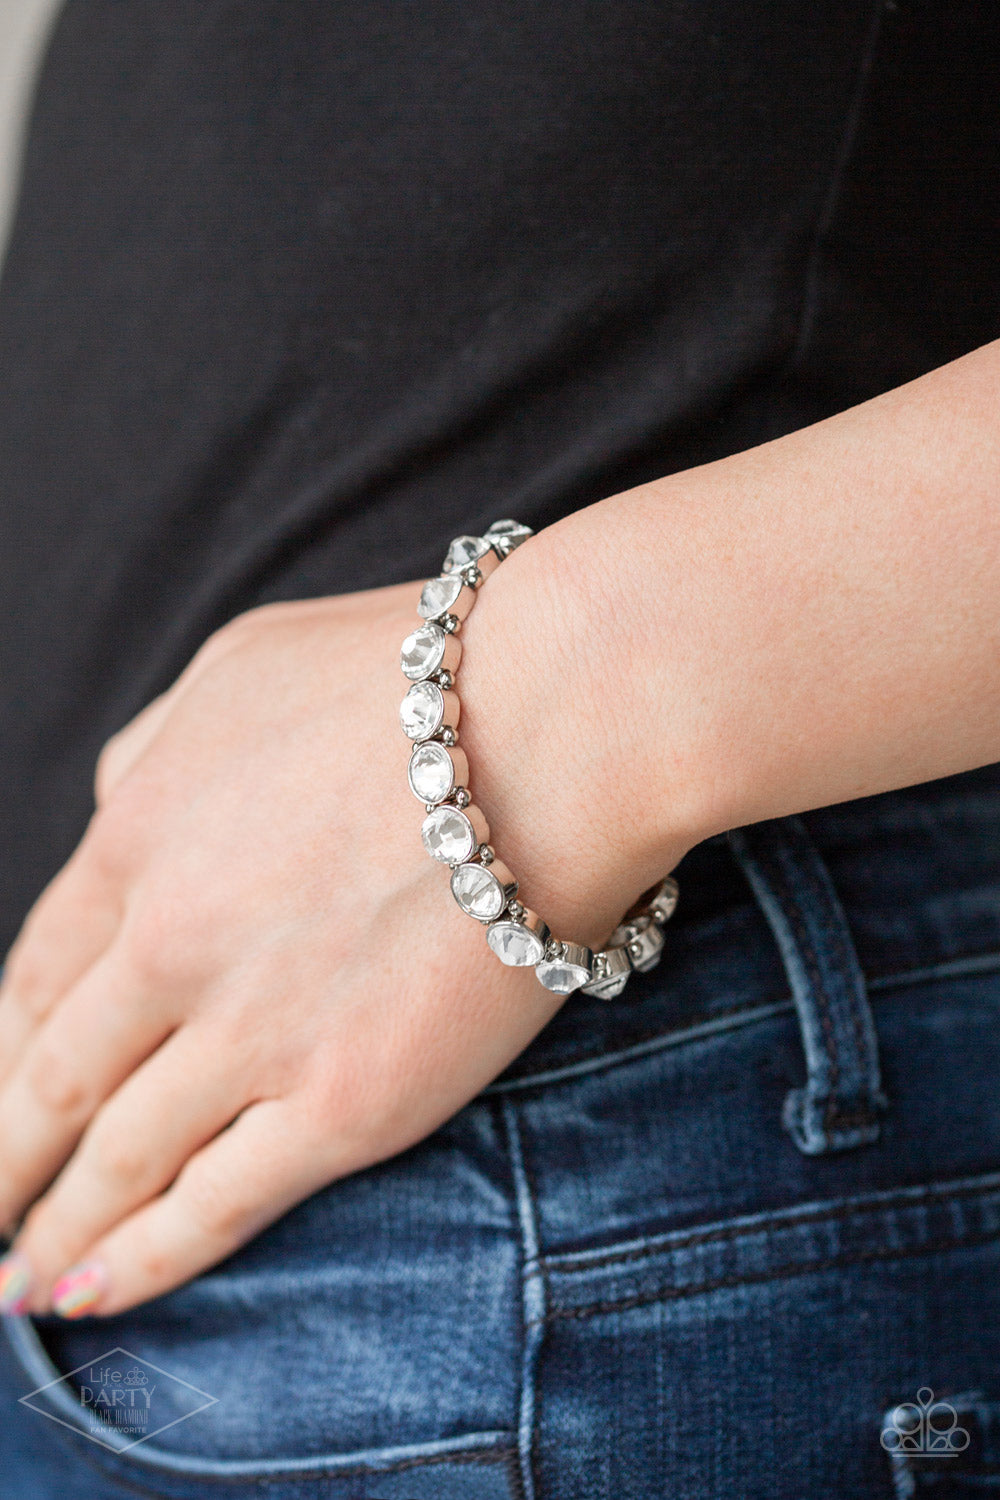 &lt;p&gt;Infused with dainty silver beads, glassy white rhinestone encrusted frames are threaded along stretchy bands around the wrist for a glamorous look.
  &lt;/p&gt;

&lt;p&gt;&lt;i&gt; Sold as one individual bracelet.&lt;/i&gt;&lt;/p&gt;



&lt;p&gt; This Fan Favorite is back in the spotlight at the request of our 2020 Life of the Party member with Black Diamond Access, Monica V. &lt;/p&gt;
